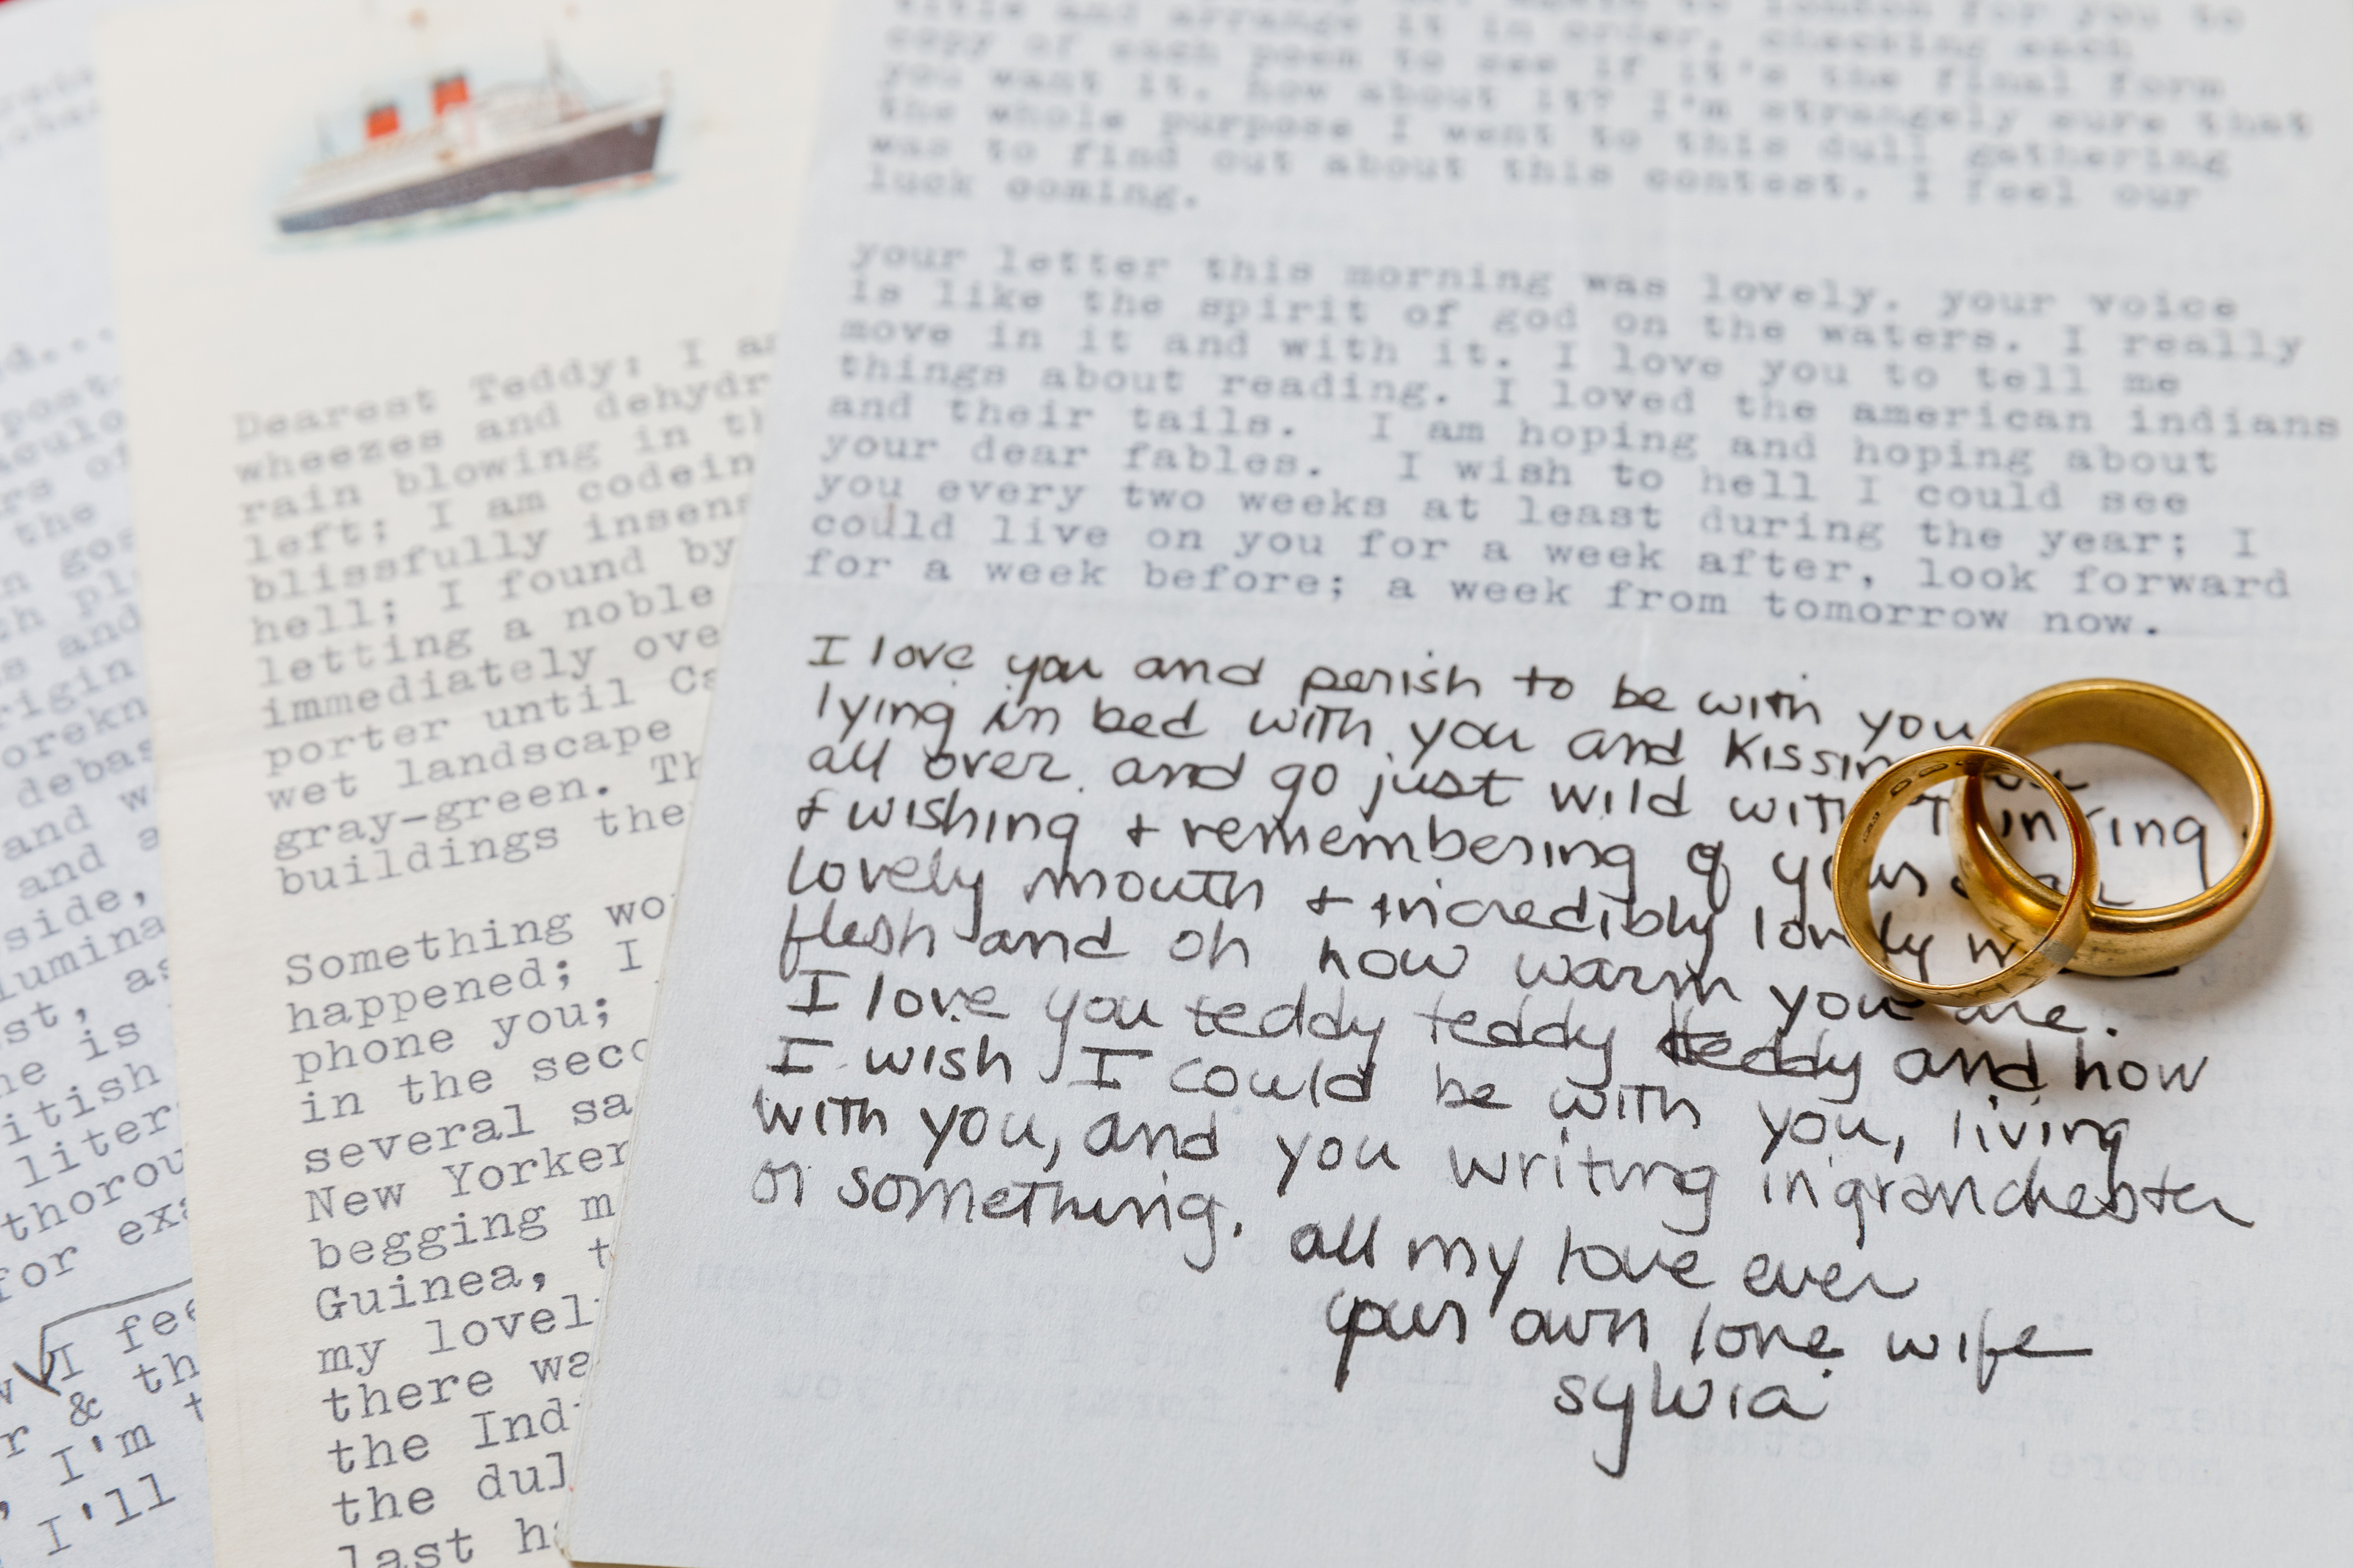 Letters to Ted Hughes from Sylvia Plath, photographed with wedding rings (2)